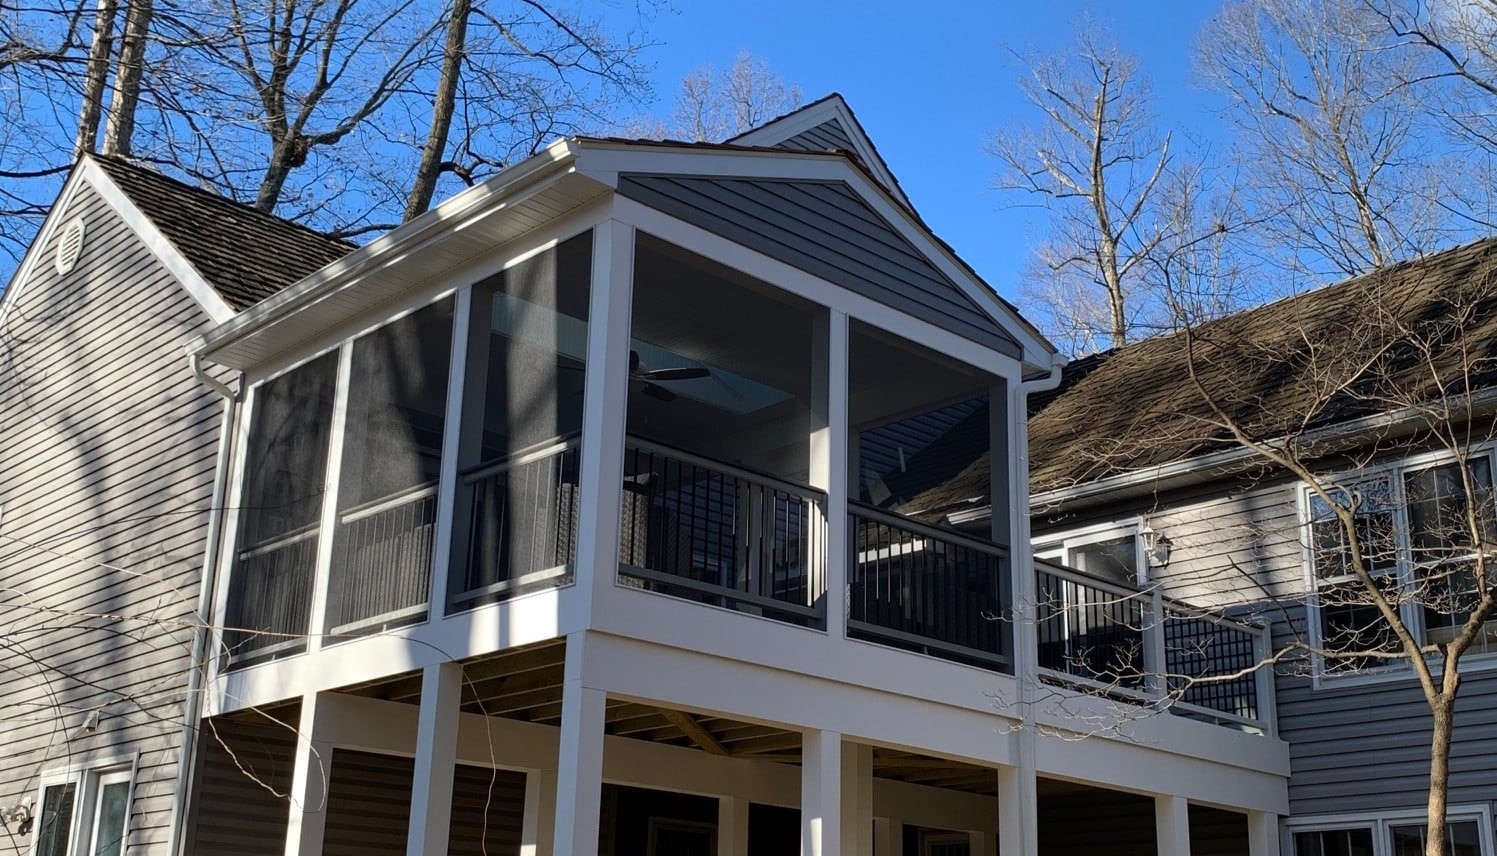 custom built deck with a screened porch in winter season